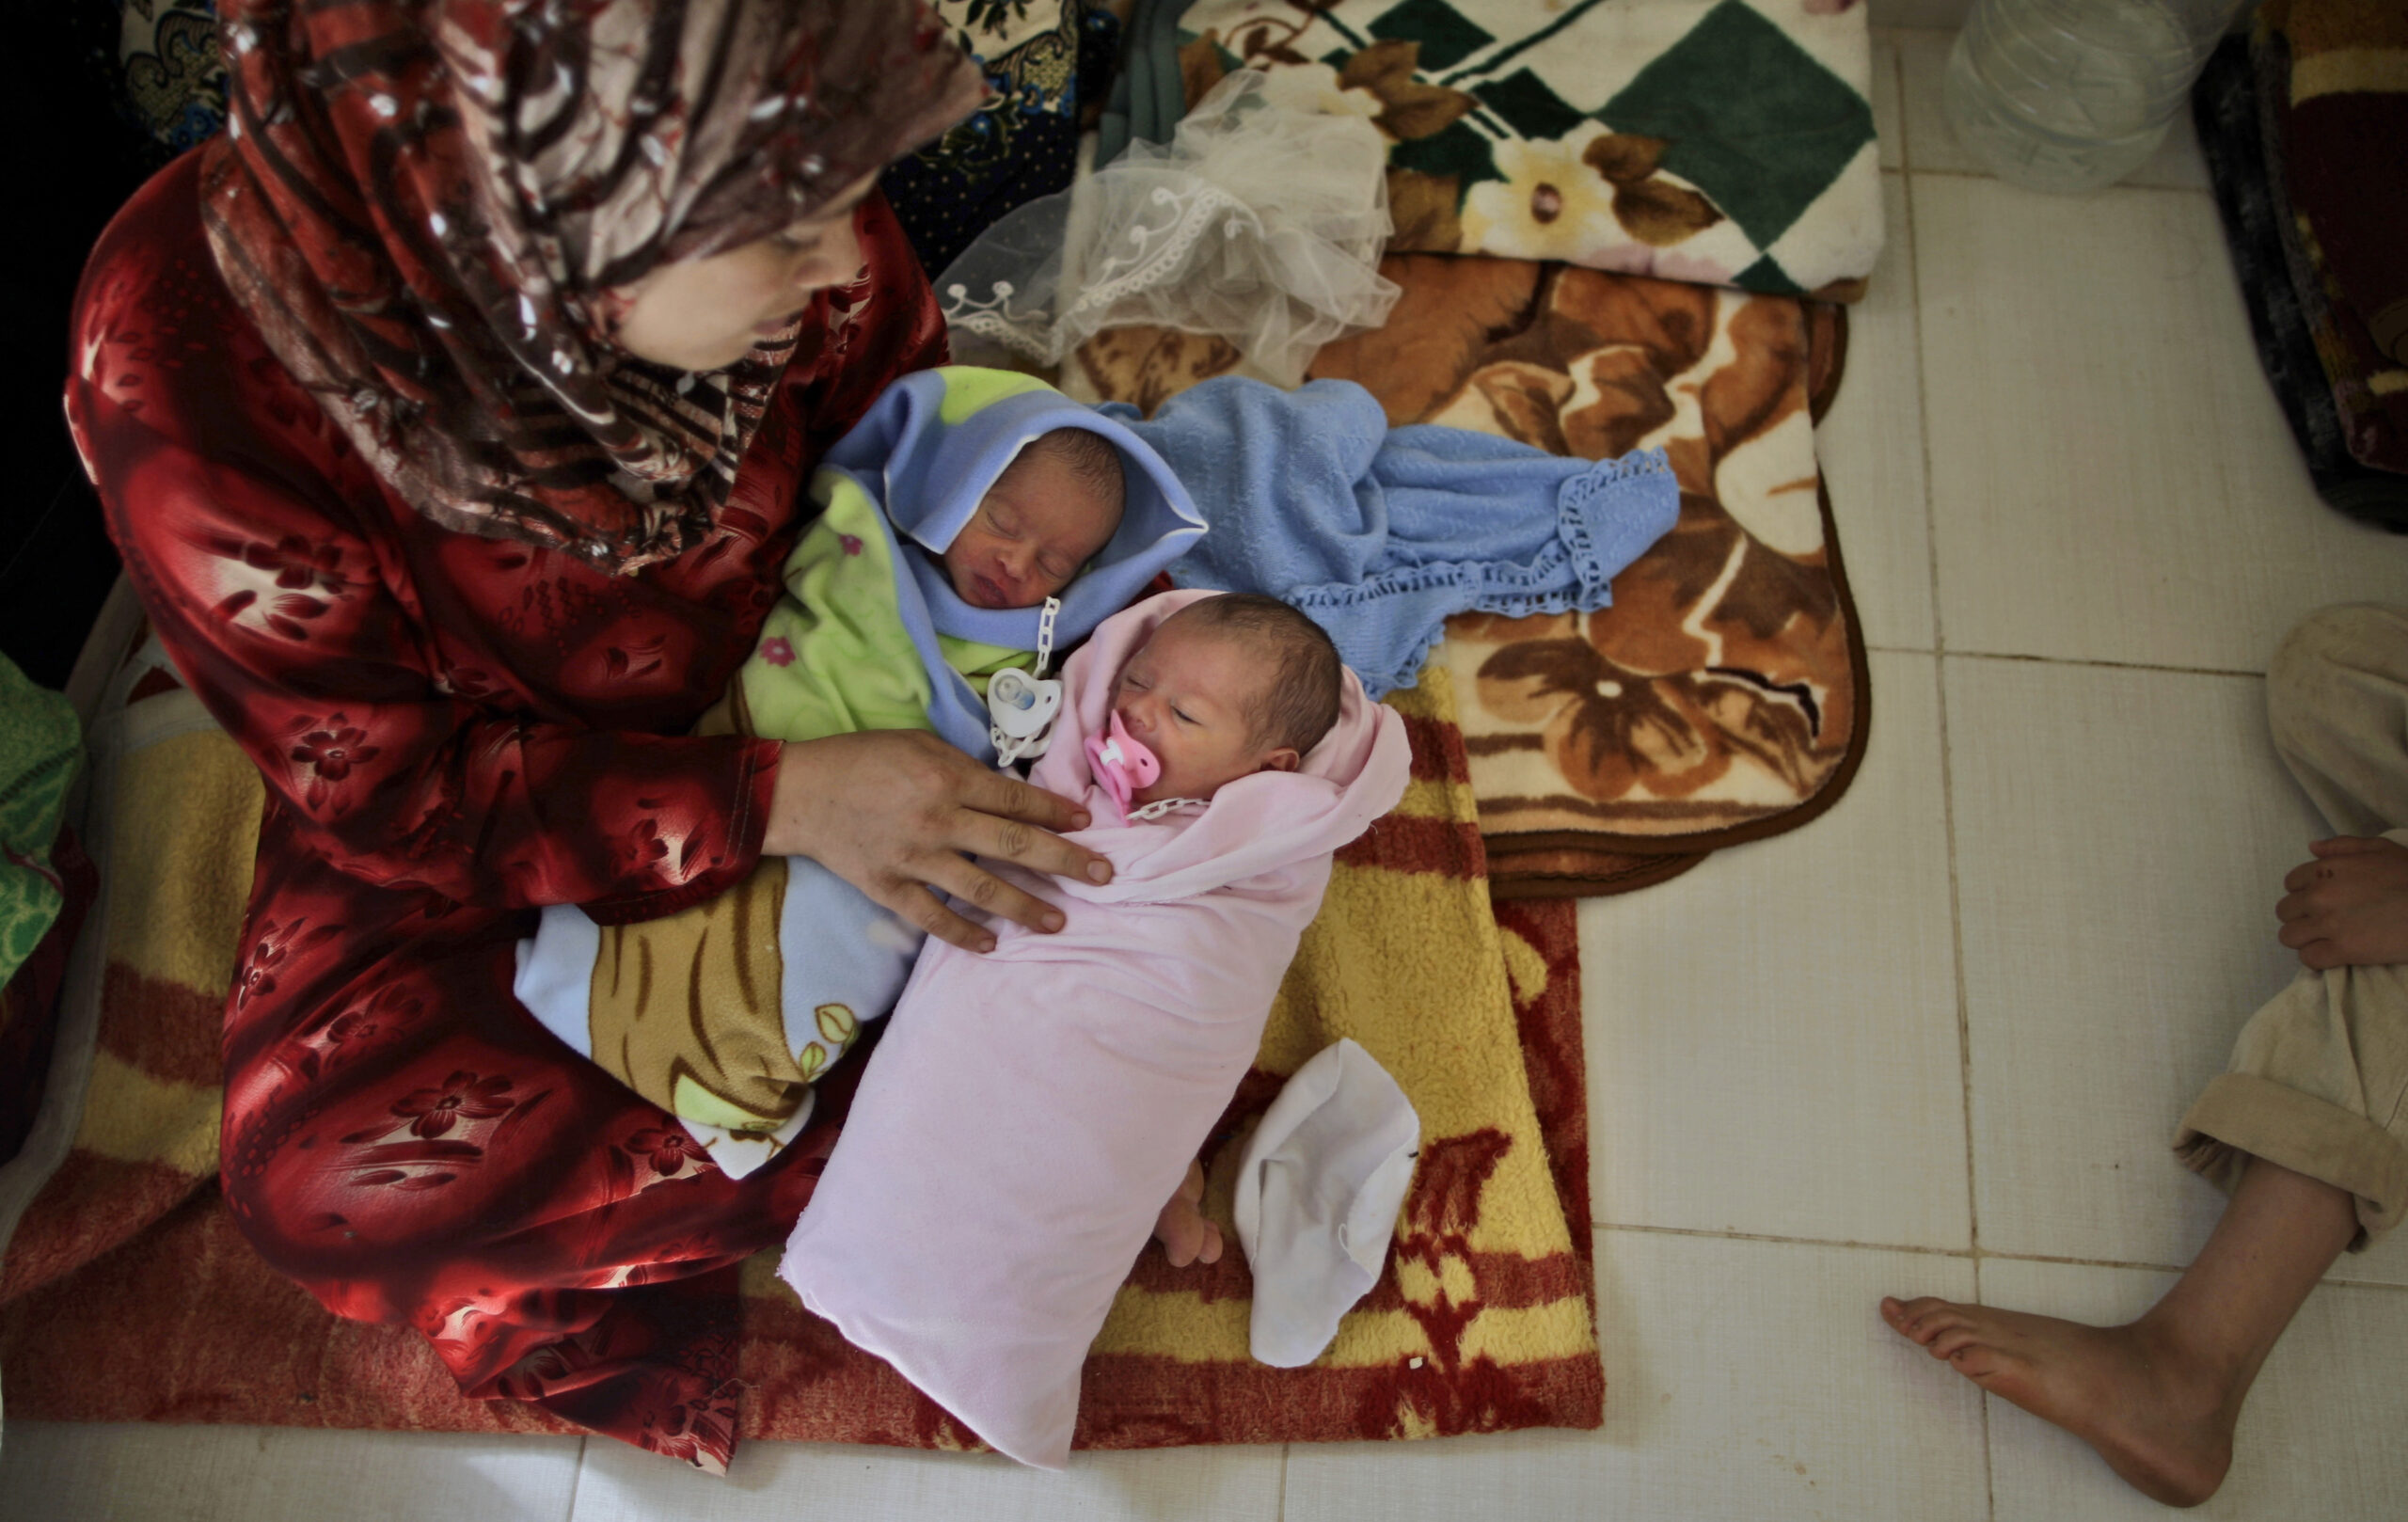 Fatimah Abdullah, 29, sits next to her 4-day-old twins